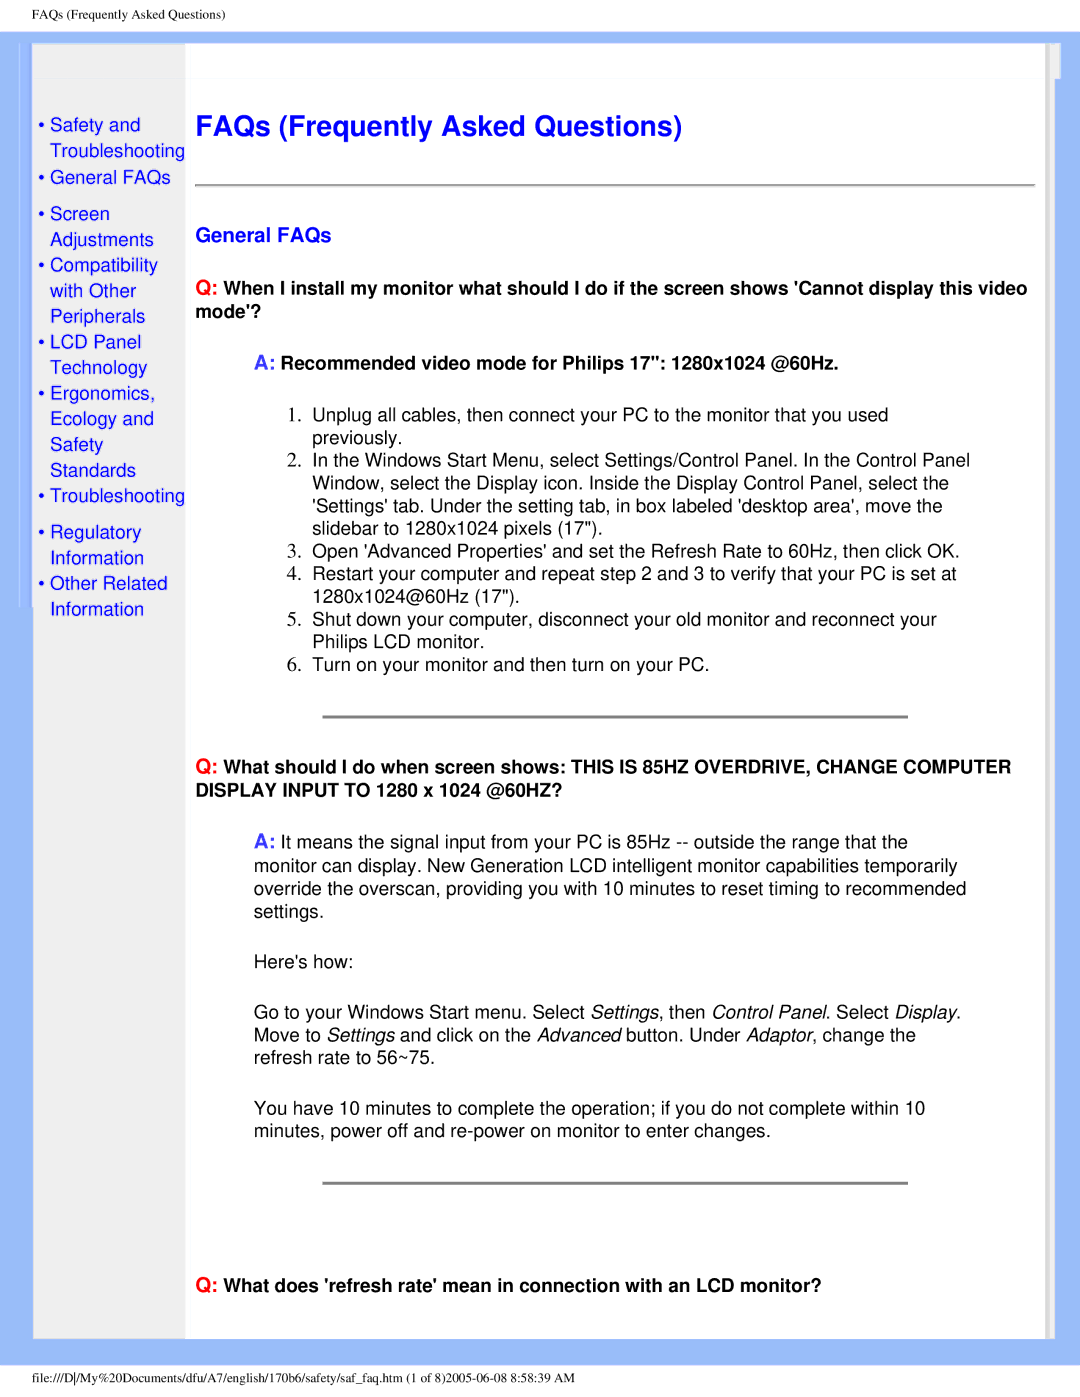 Philips 170B6 user manual FAQs Frequently Asked Questions, General FAQs 